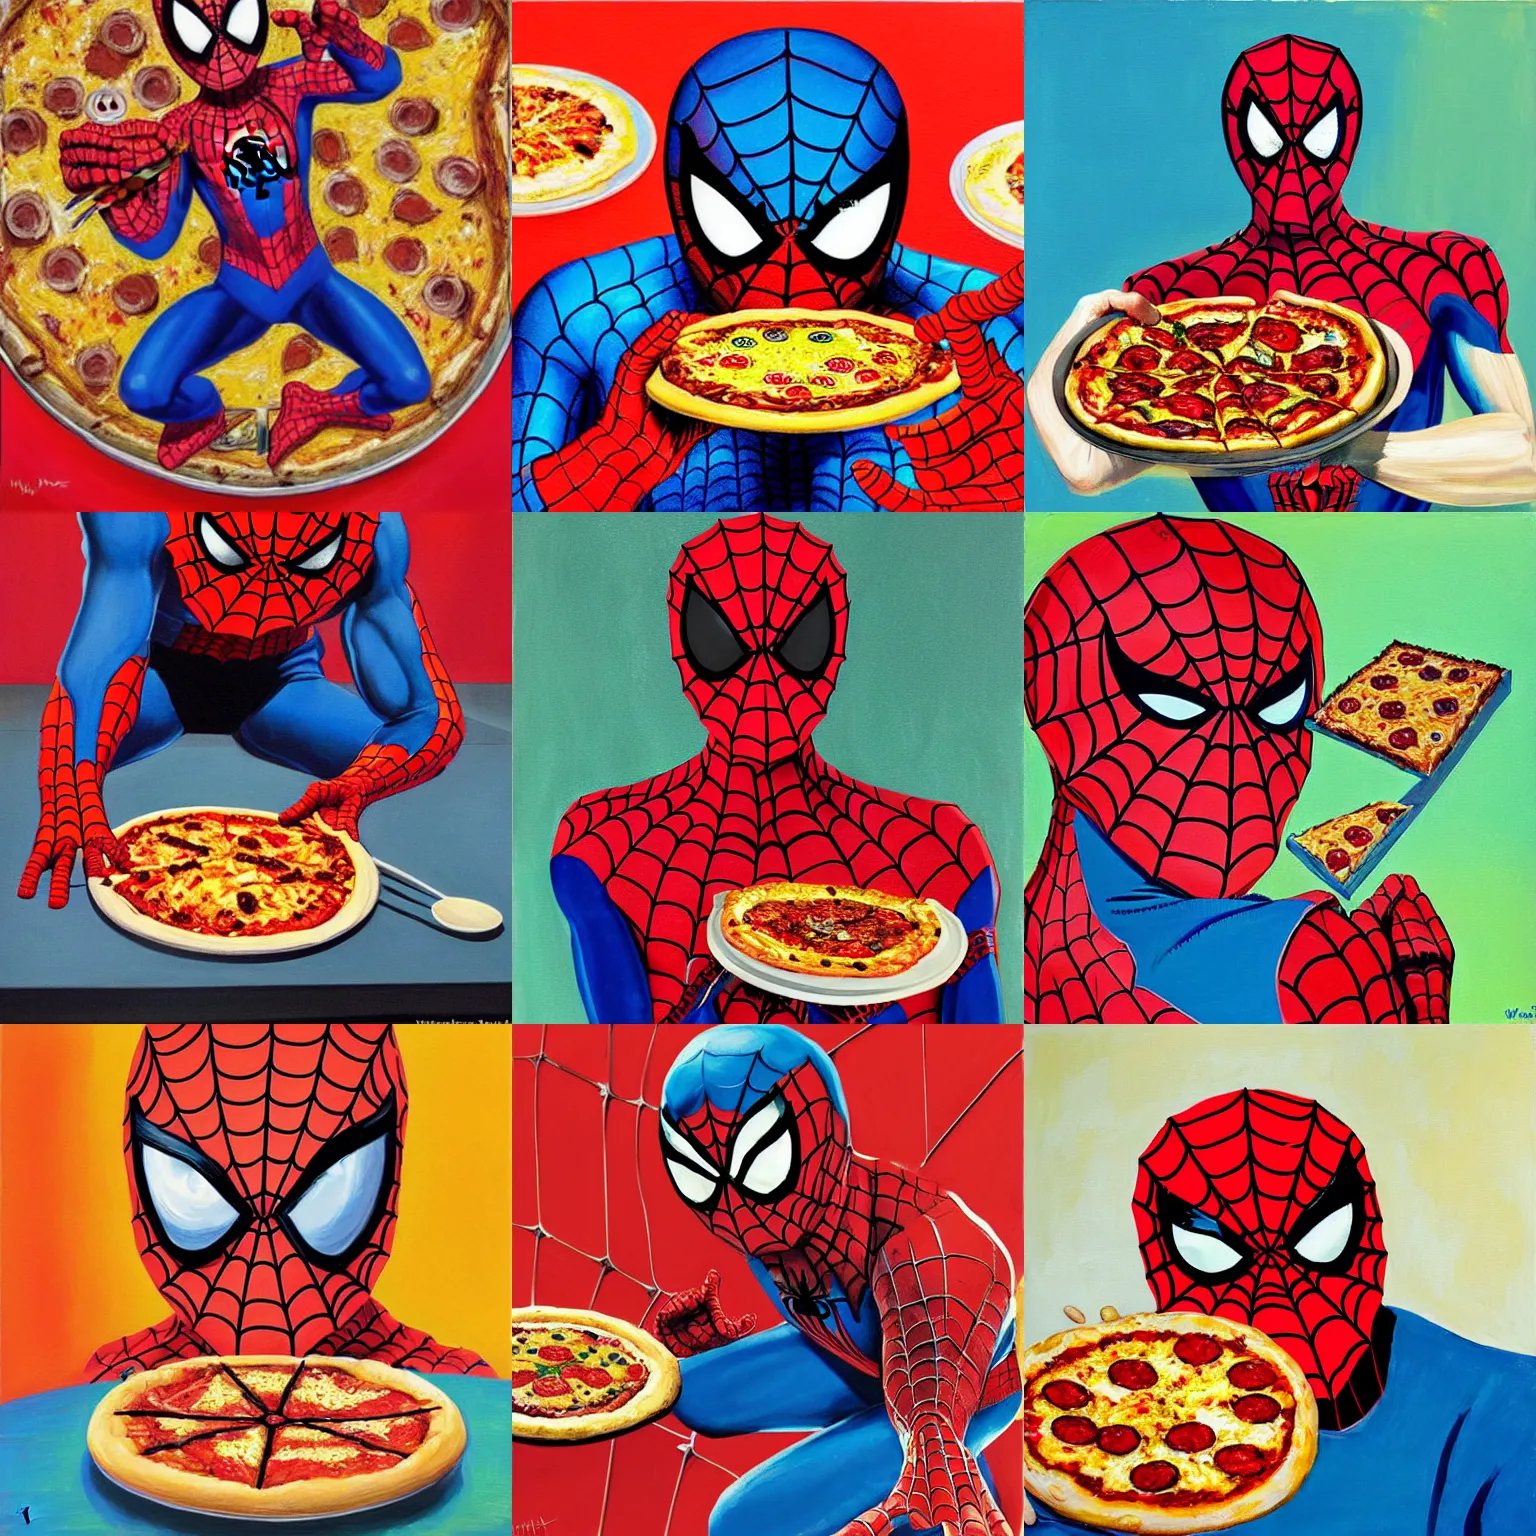 Prompt: a portrait of a happy Spiderman eating pizza by Wayne Thiebaud, painting by Wayne Thiebaud, heavy pigment, colourful, heavy impasto technique, anime style, big eyes, space age pop